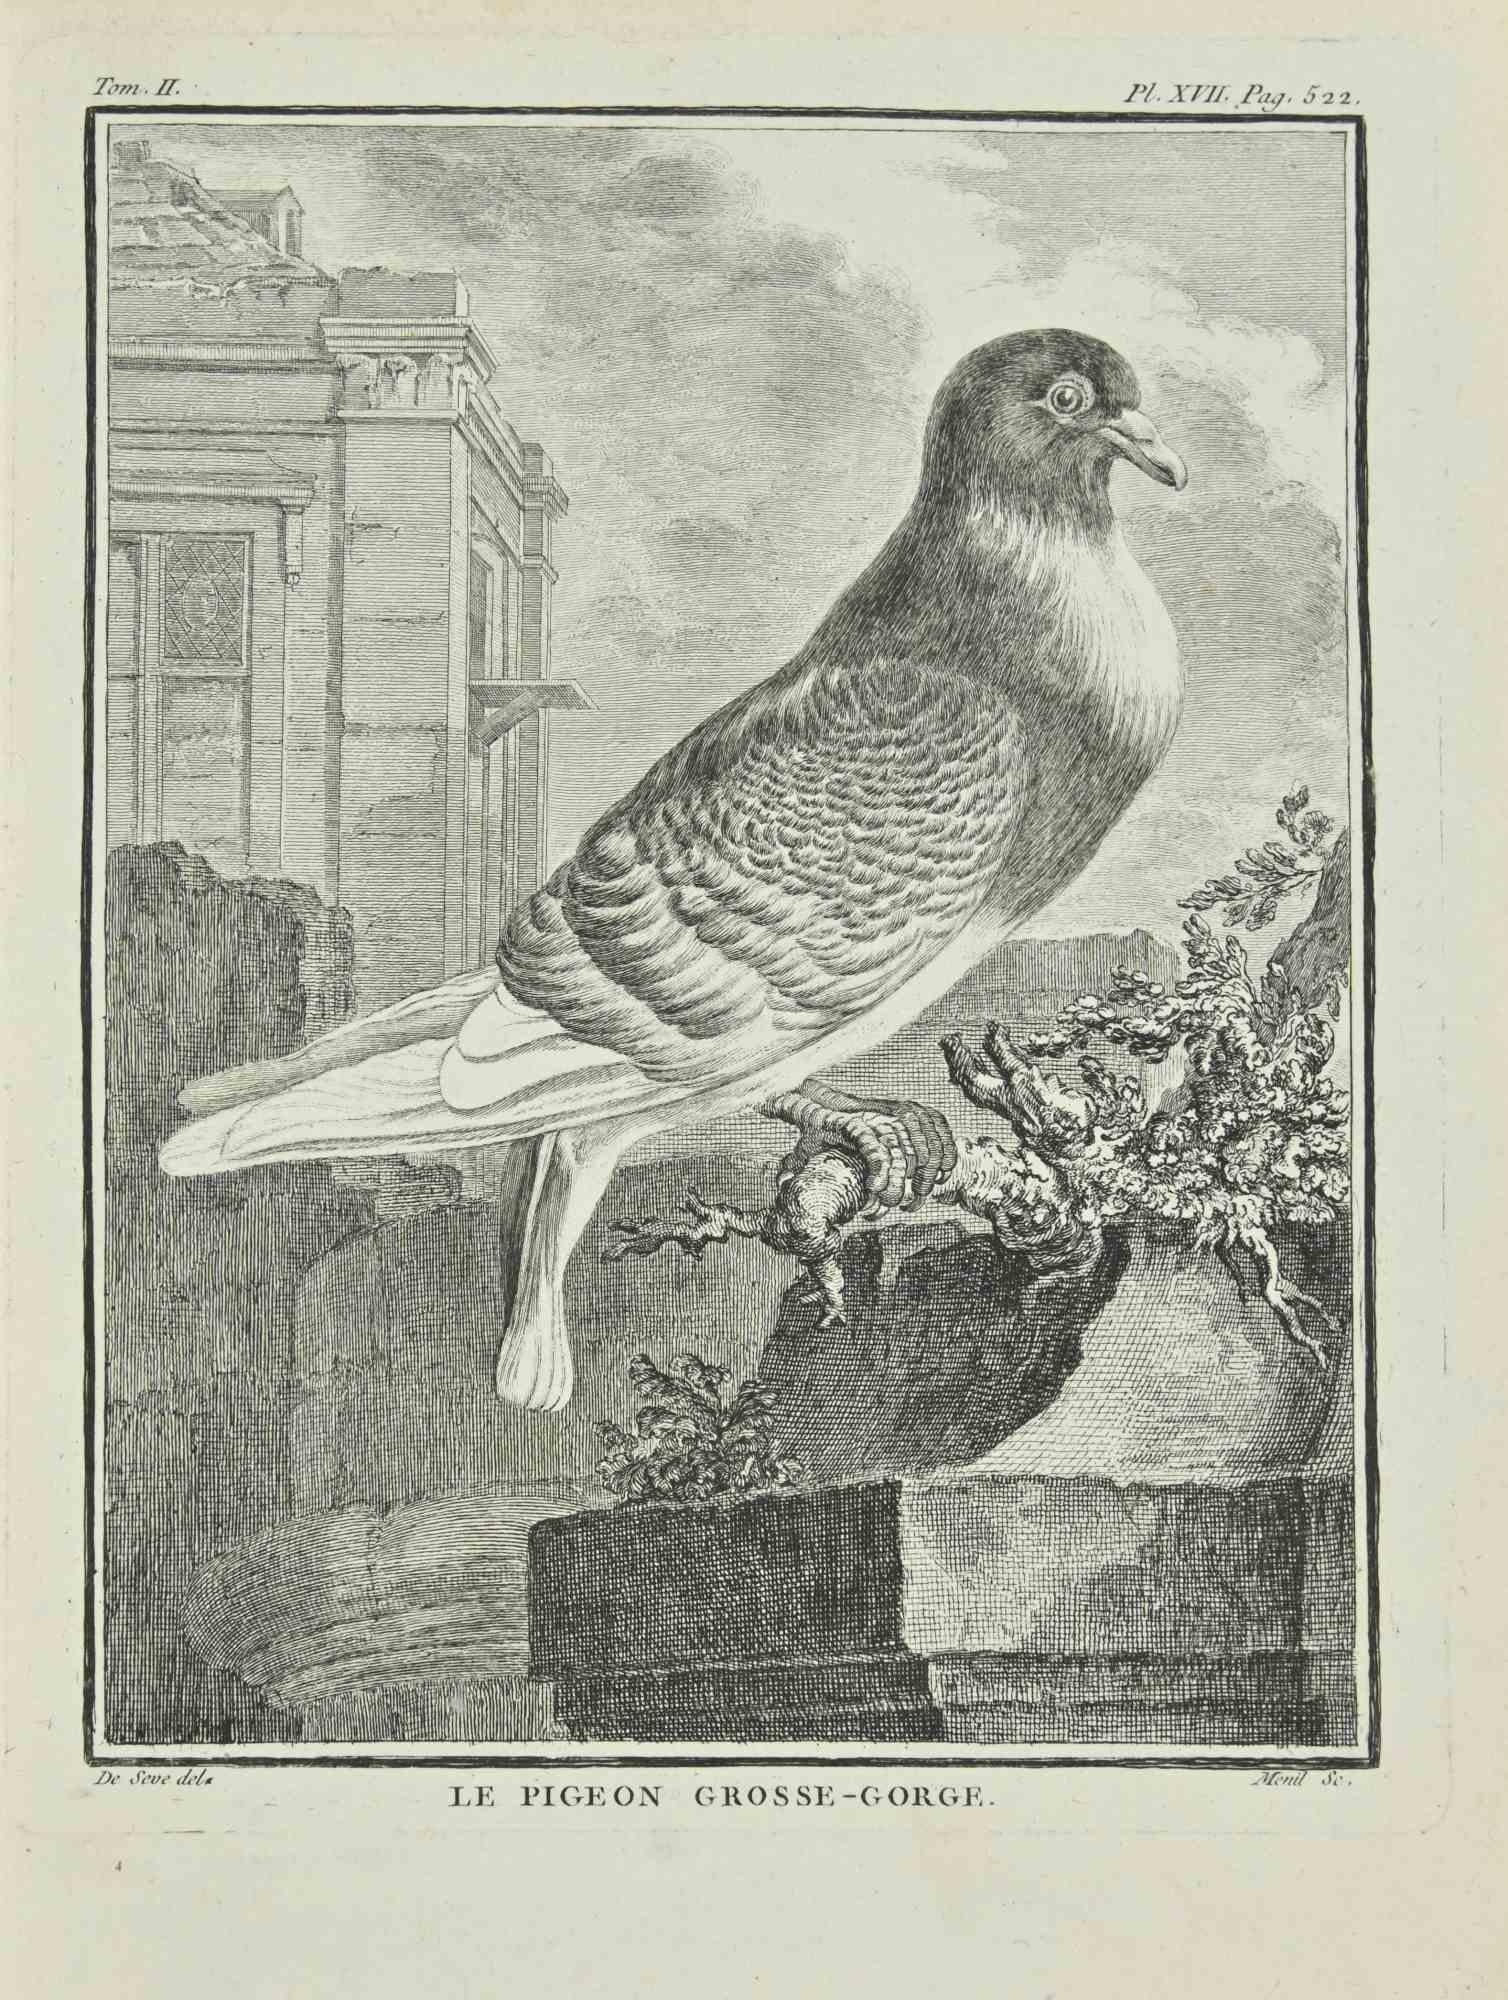 Le Pigeon Grosse-Gorge - Etching by Juste Chevillet - 1771